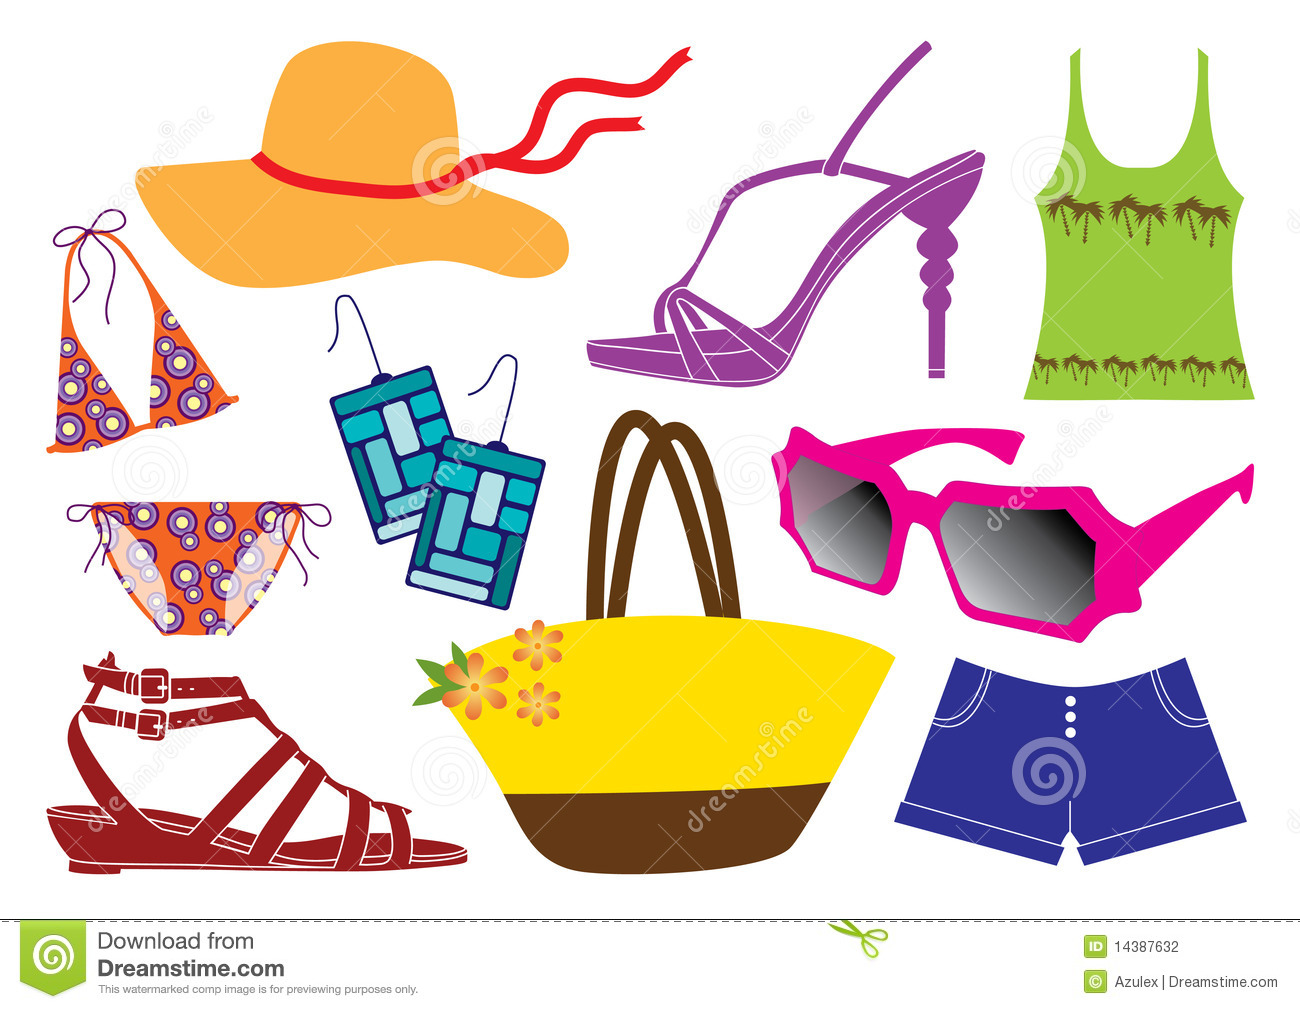 Sunny Weather Clipart